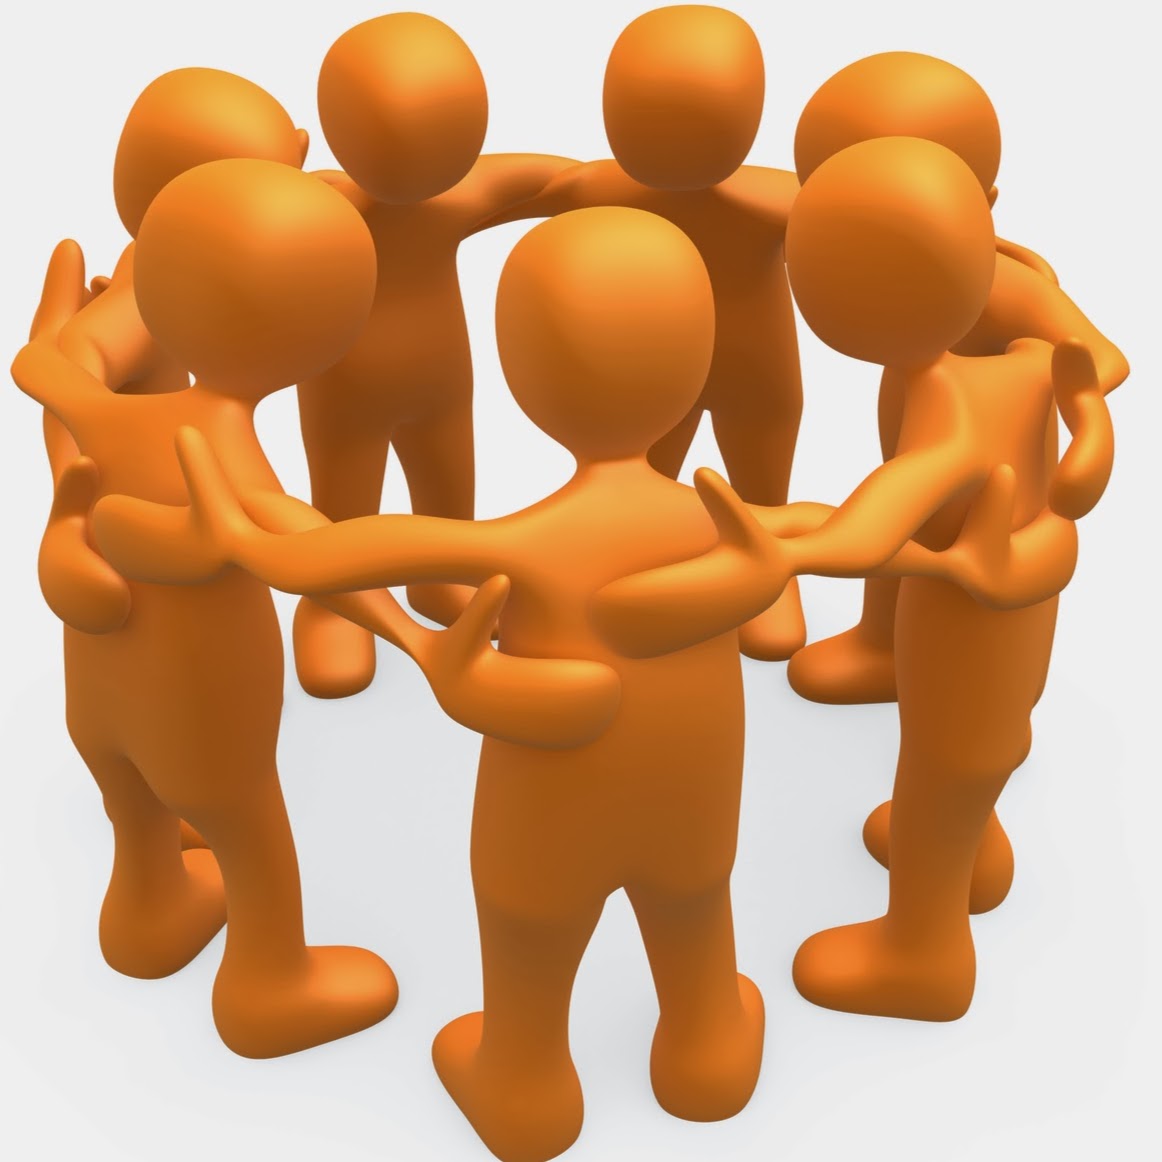 Free group hugs cliparts. Hugging clipart work